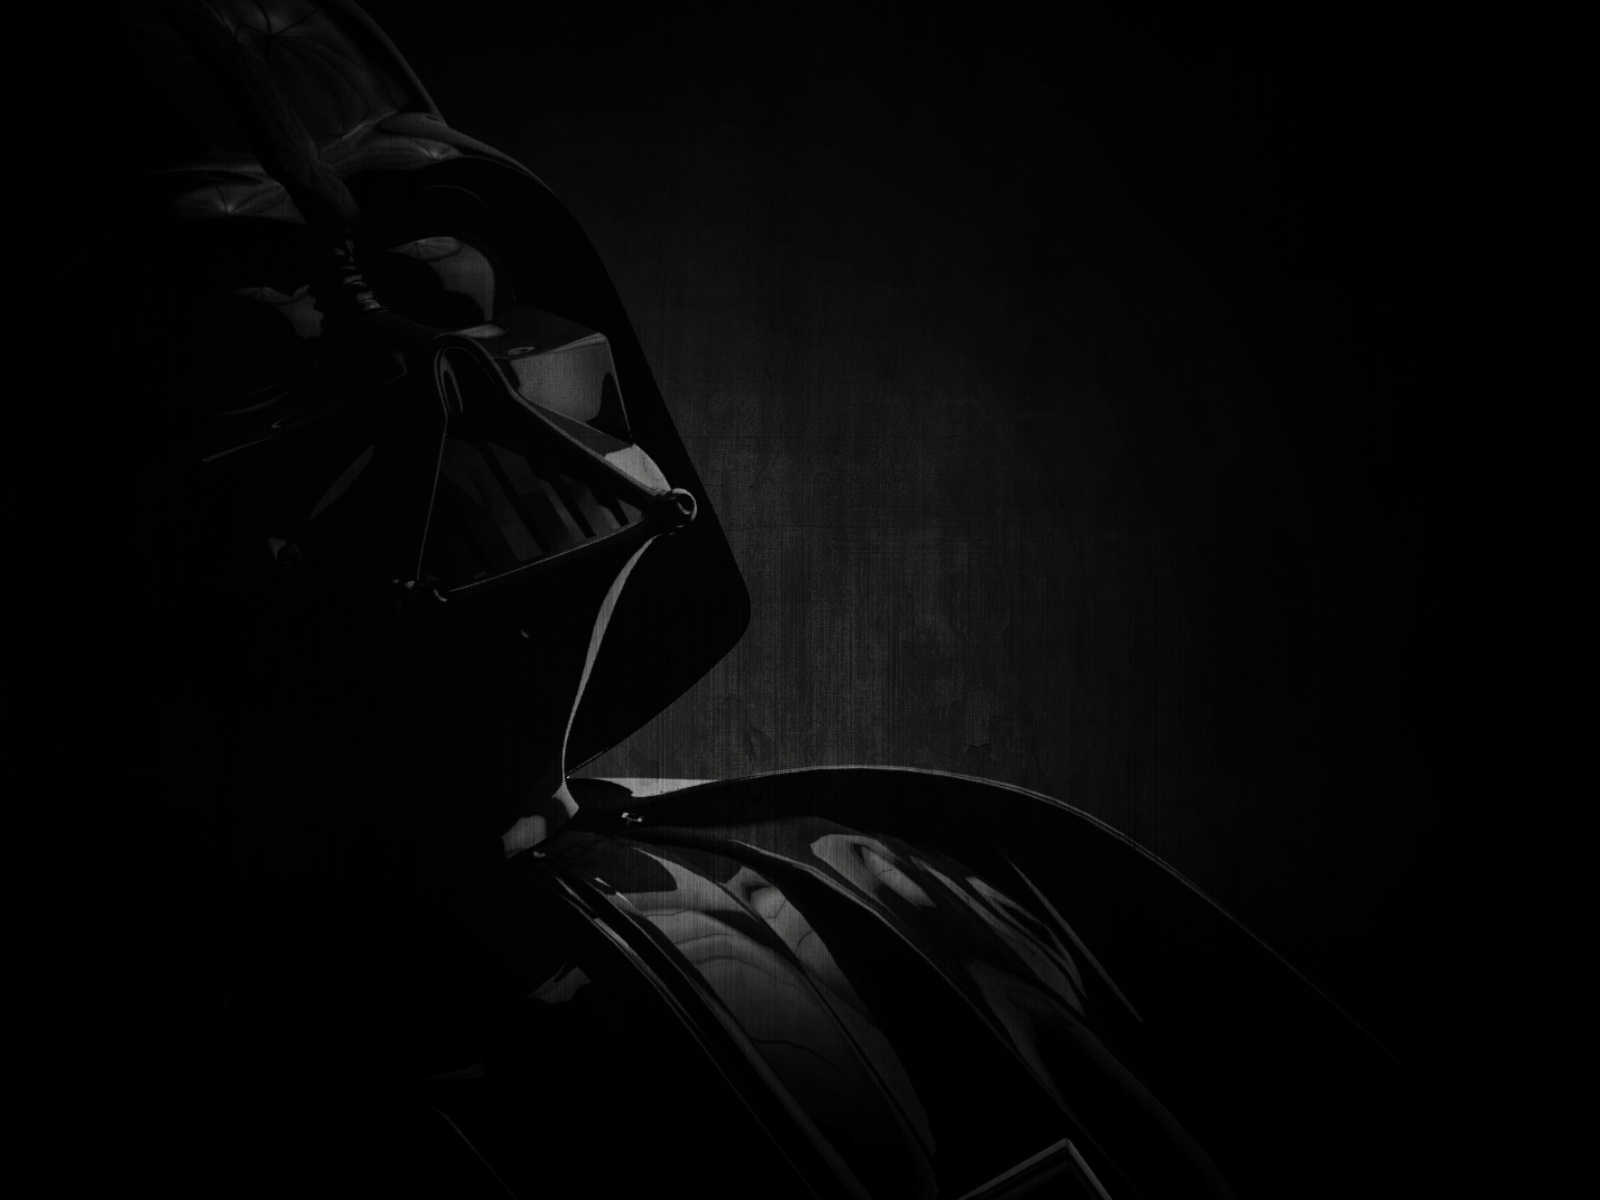 Darth Vader Character, for 1600 x 1200 resolution